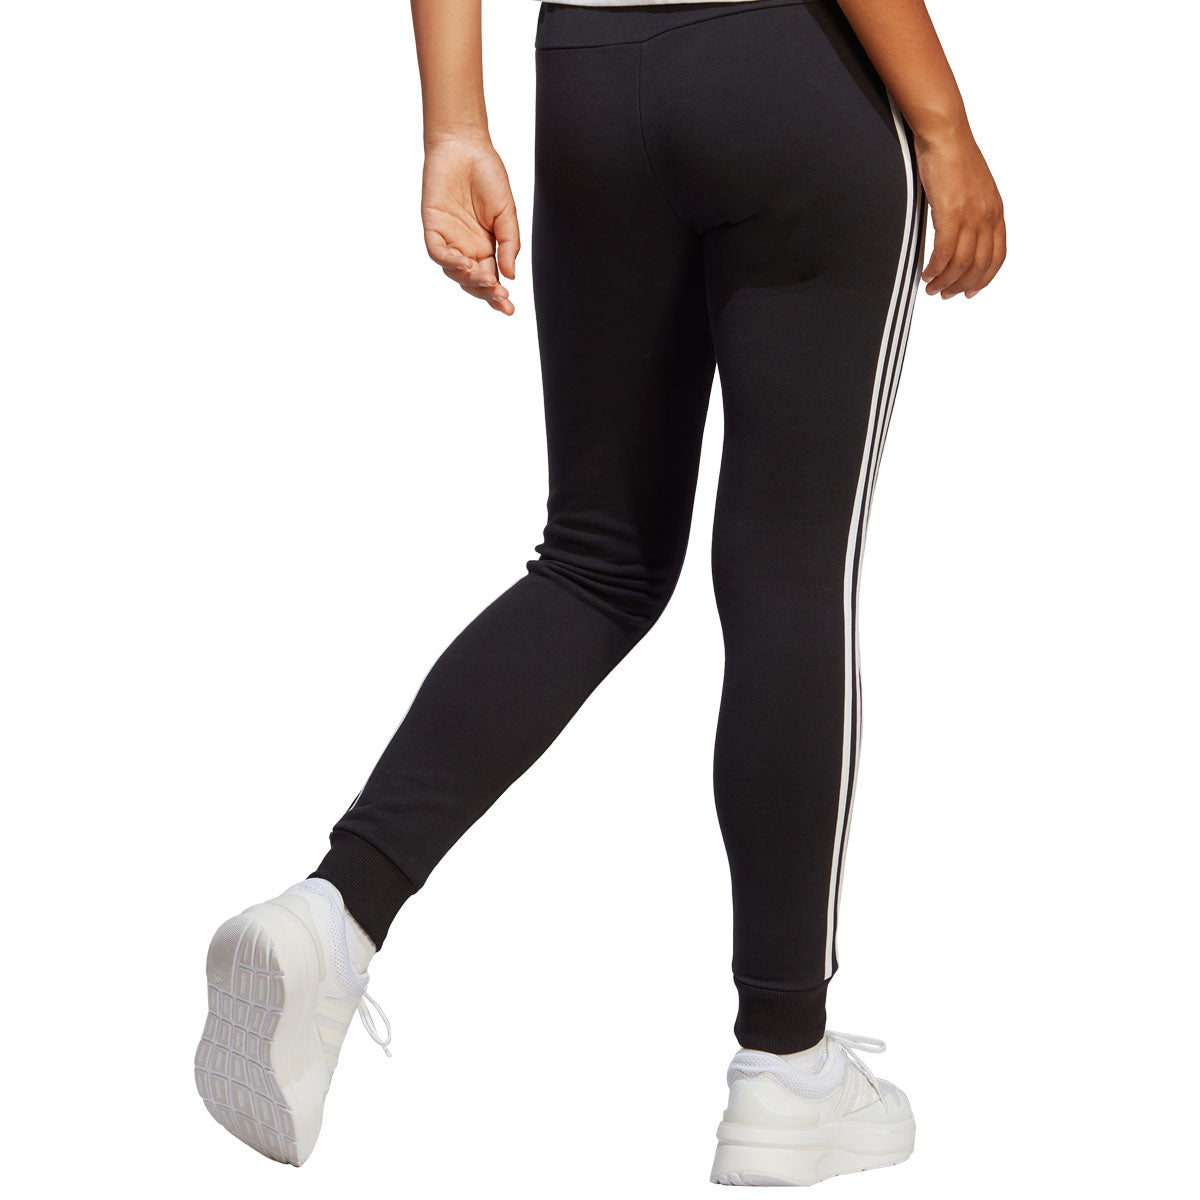 adidas Essentials 3 Stripes French Terry Cuffed Joggers - Womens - Black/White